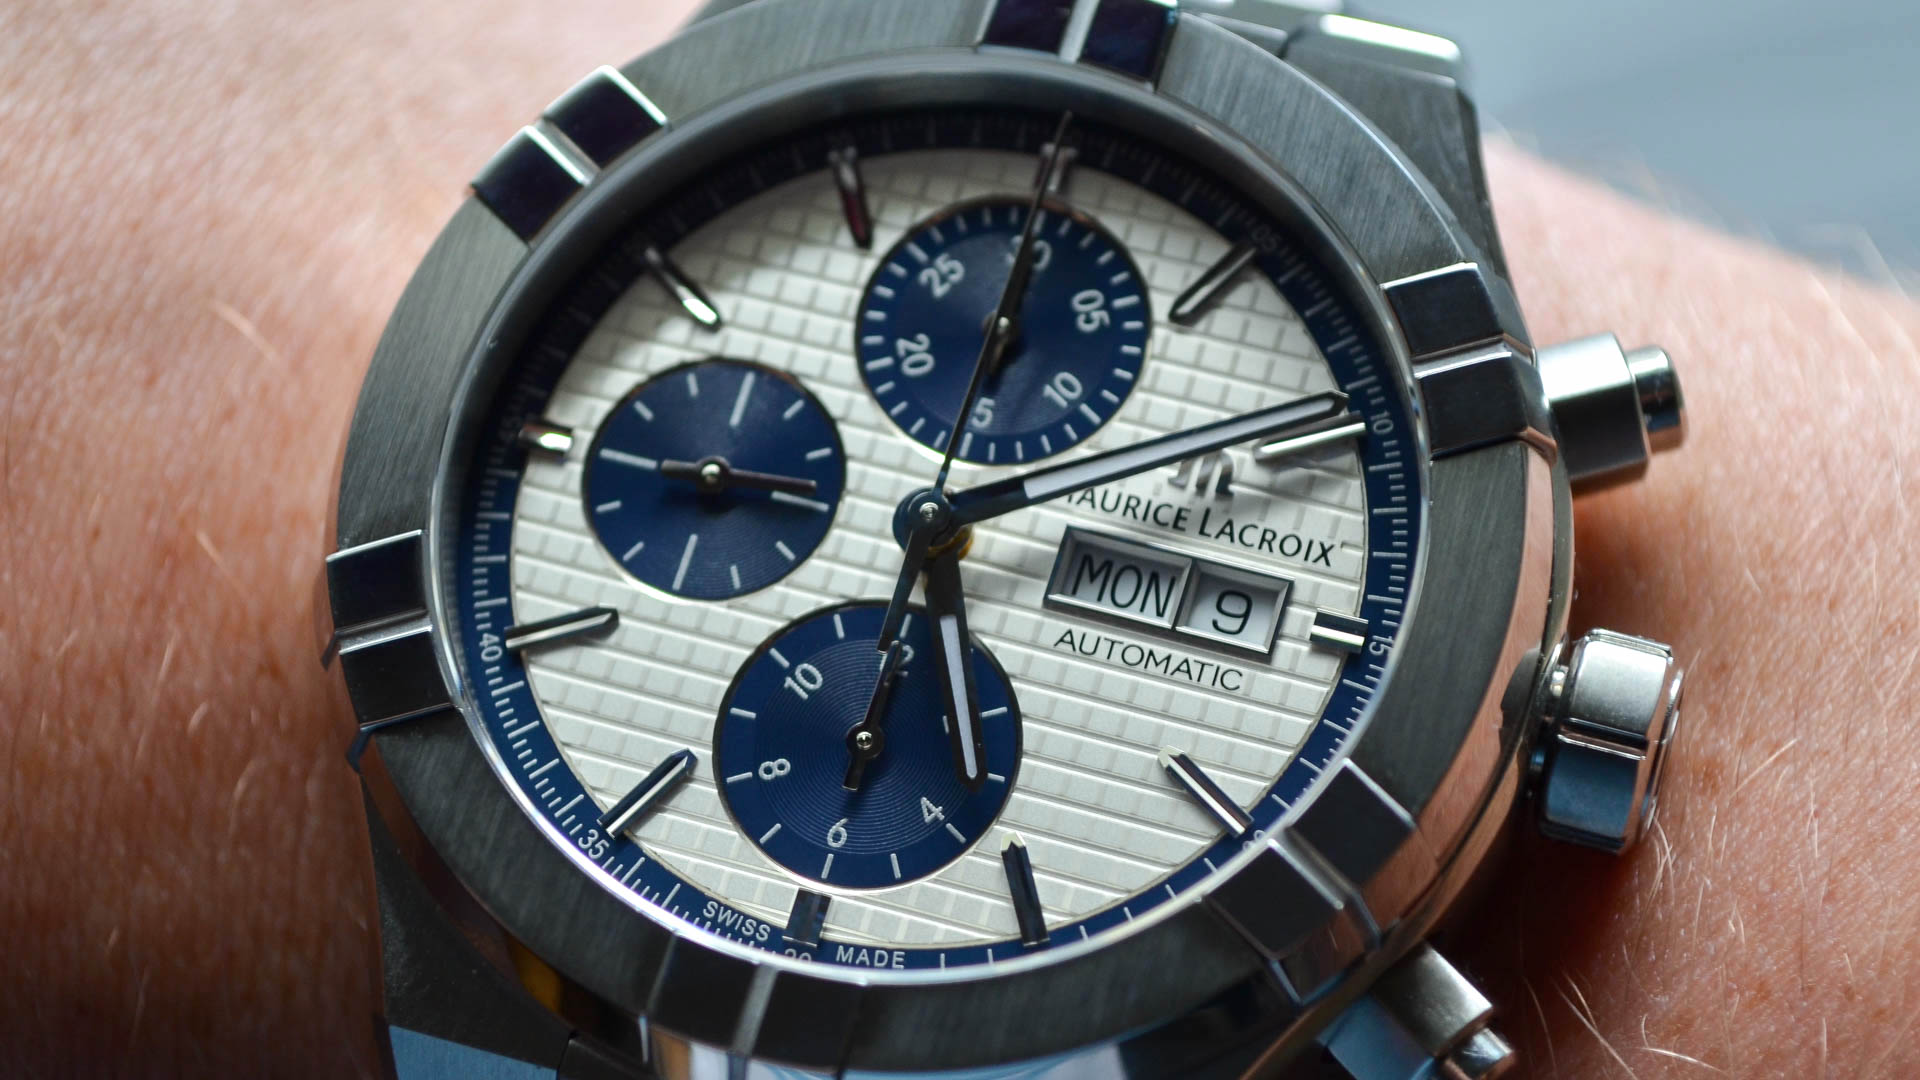 Maurice Lacroix Aikon Chronograph Automatic Watch Review